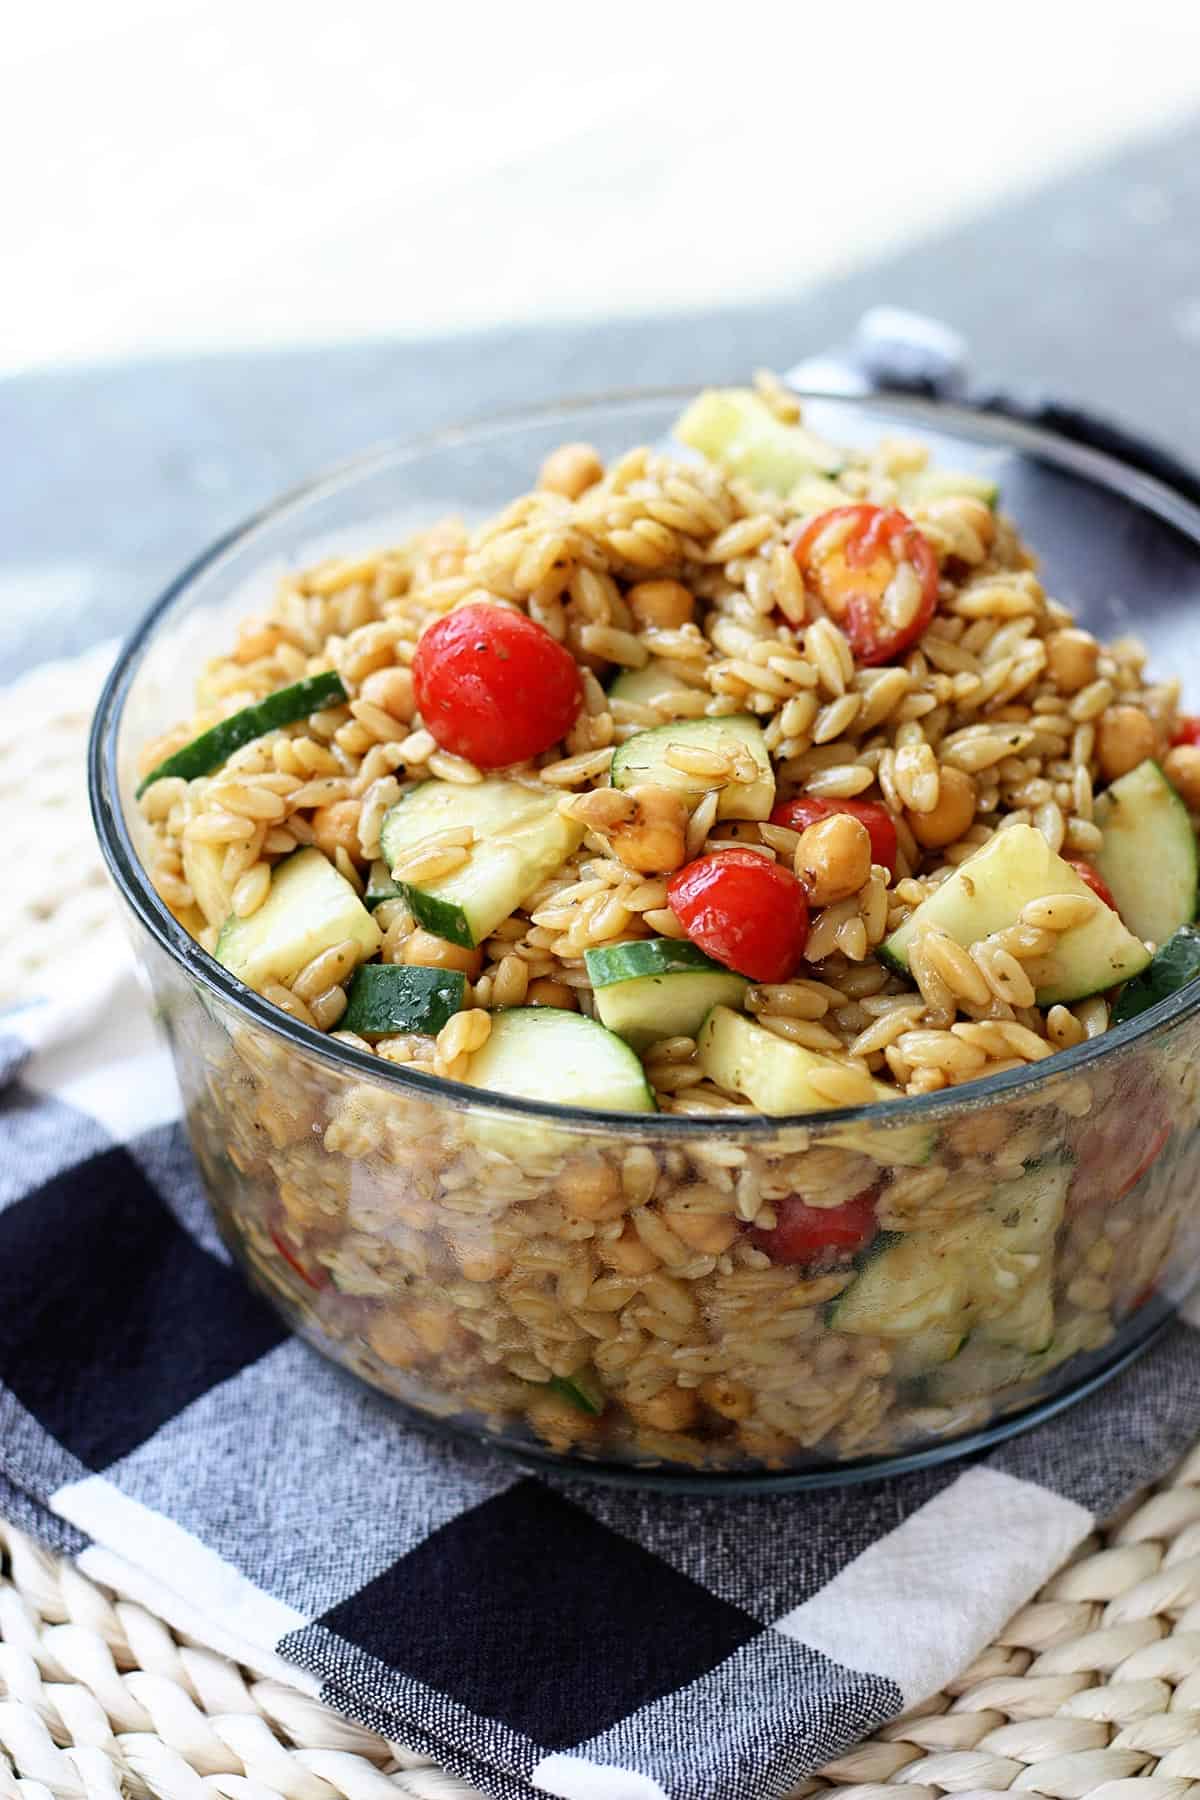 Orzo pasta salad in a glass serving bowl.